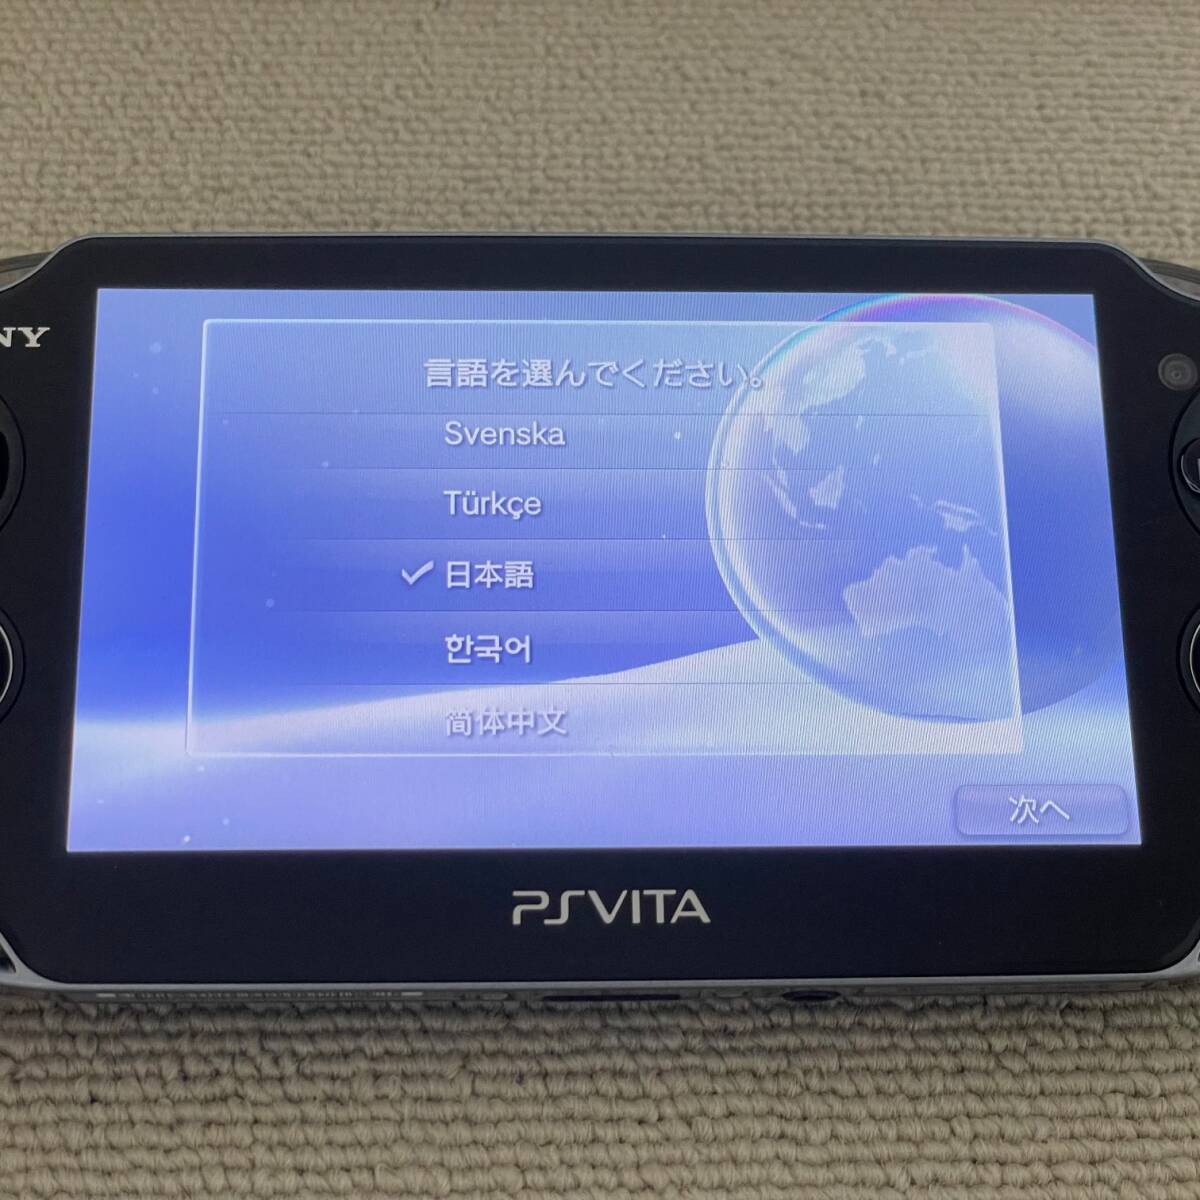  secondhand goods SONY PlayStationVita PCH-1000 black game machine portable 1 jpy from selling out 